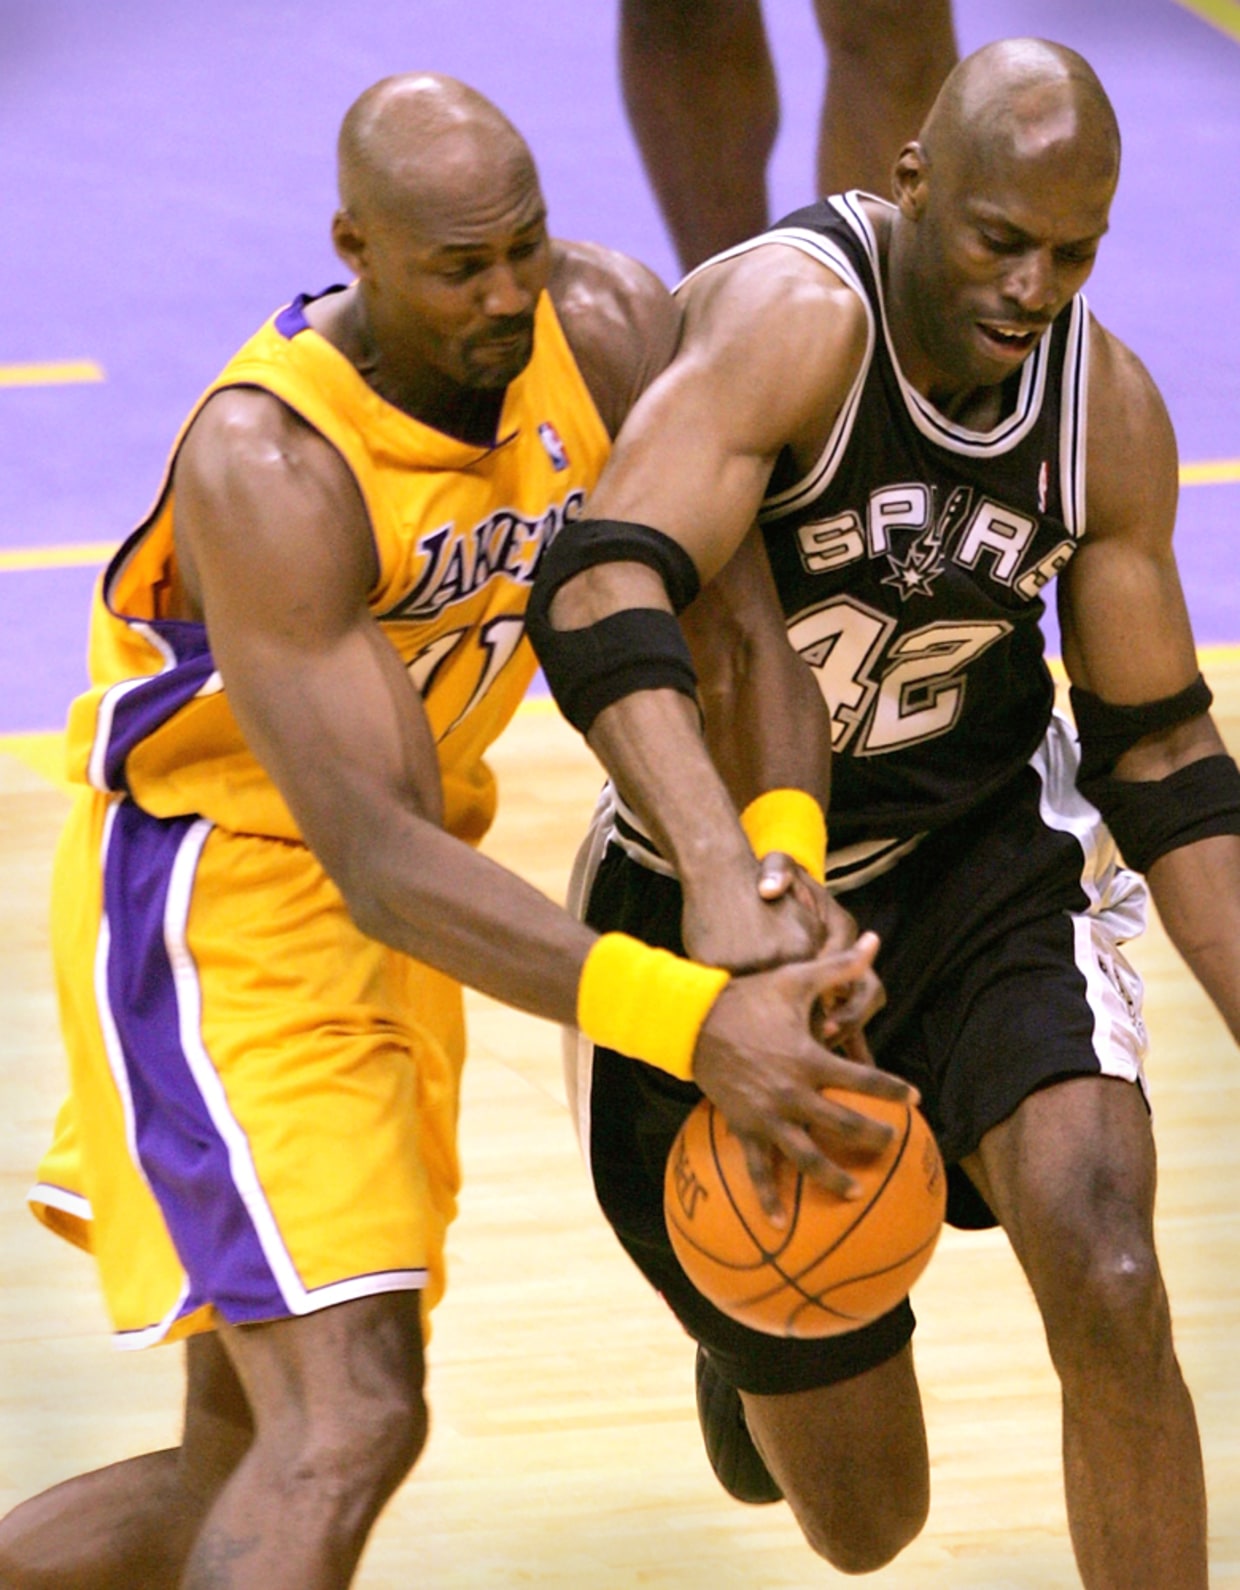 Los Angeles Lakers forward Karl Malone scored 20 points and had six  rebounds during a 98-90 victory over the New York Knicks in an NBA  basketball game at the Staples Center on